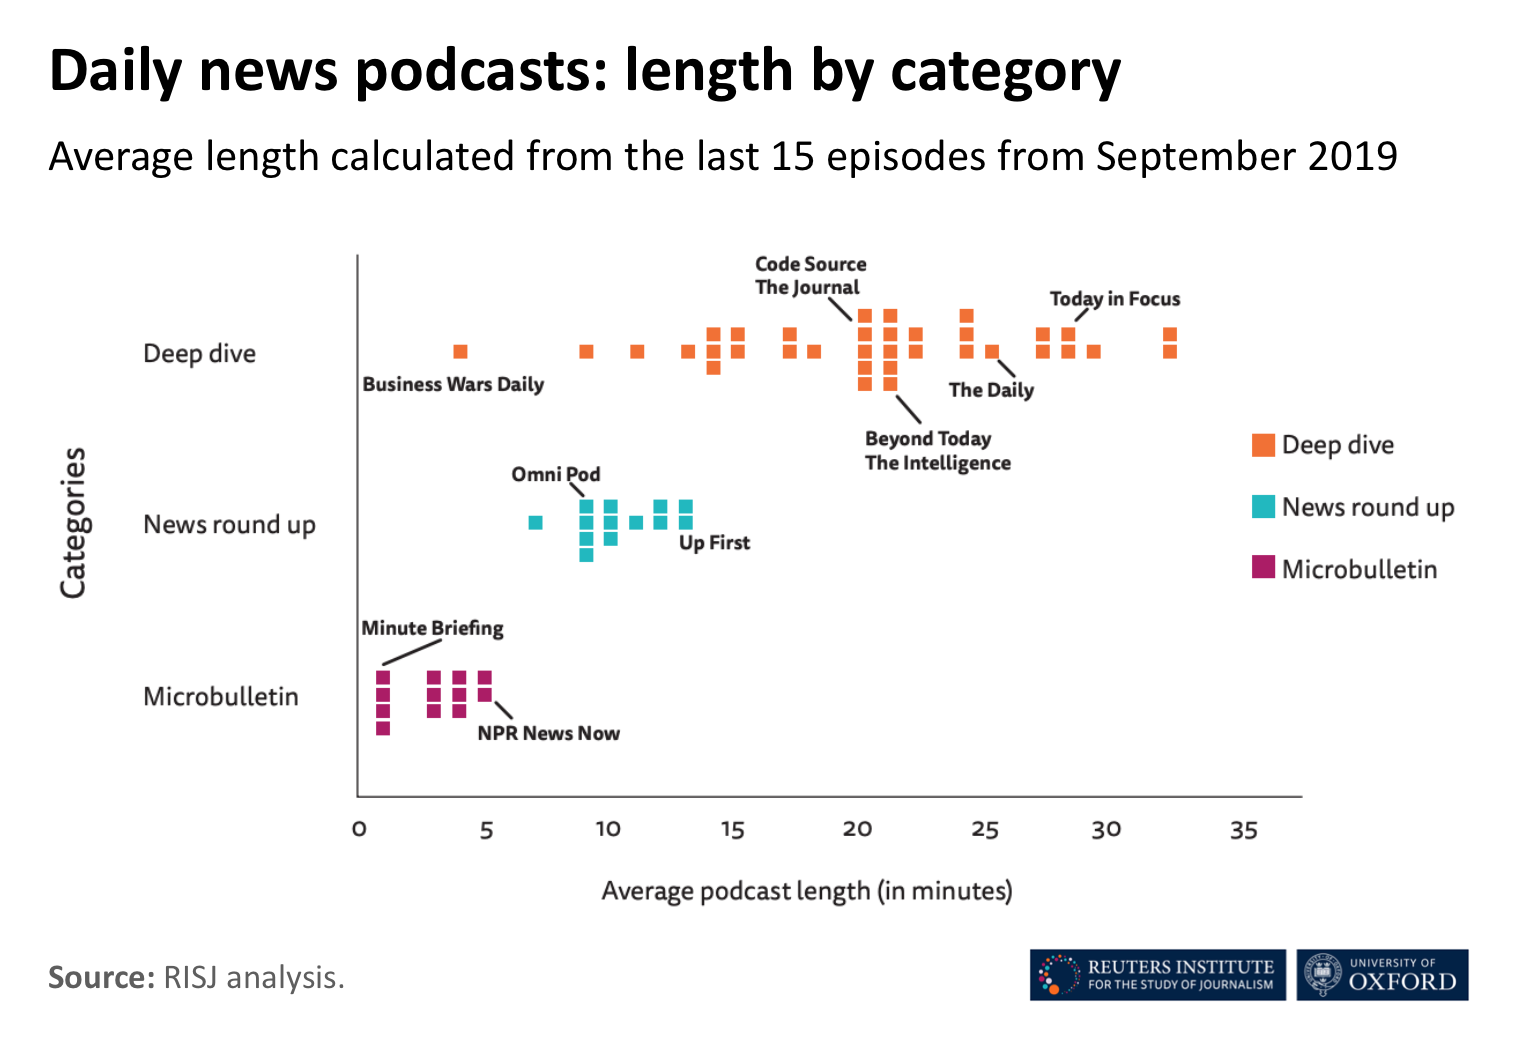 Podcasts by length